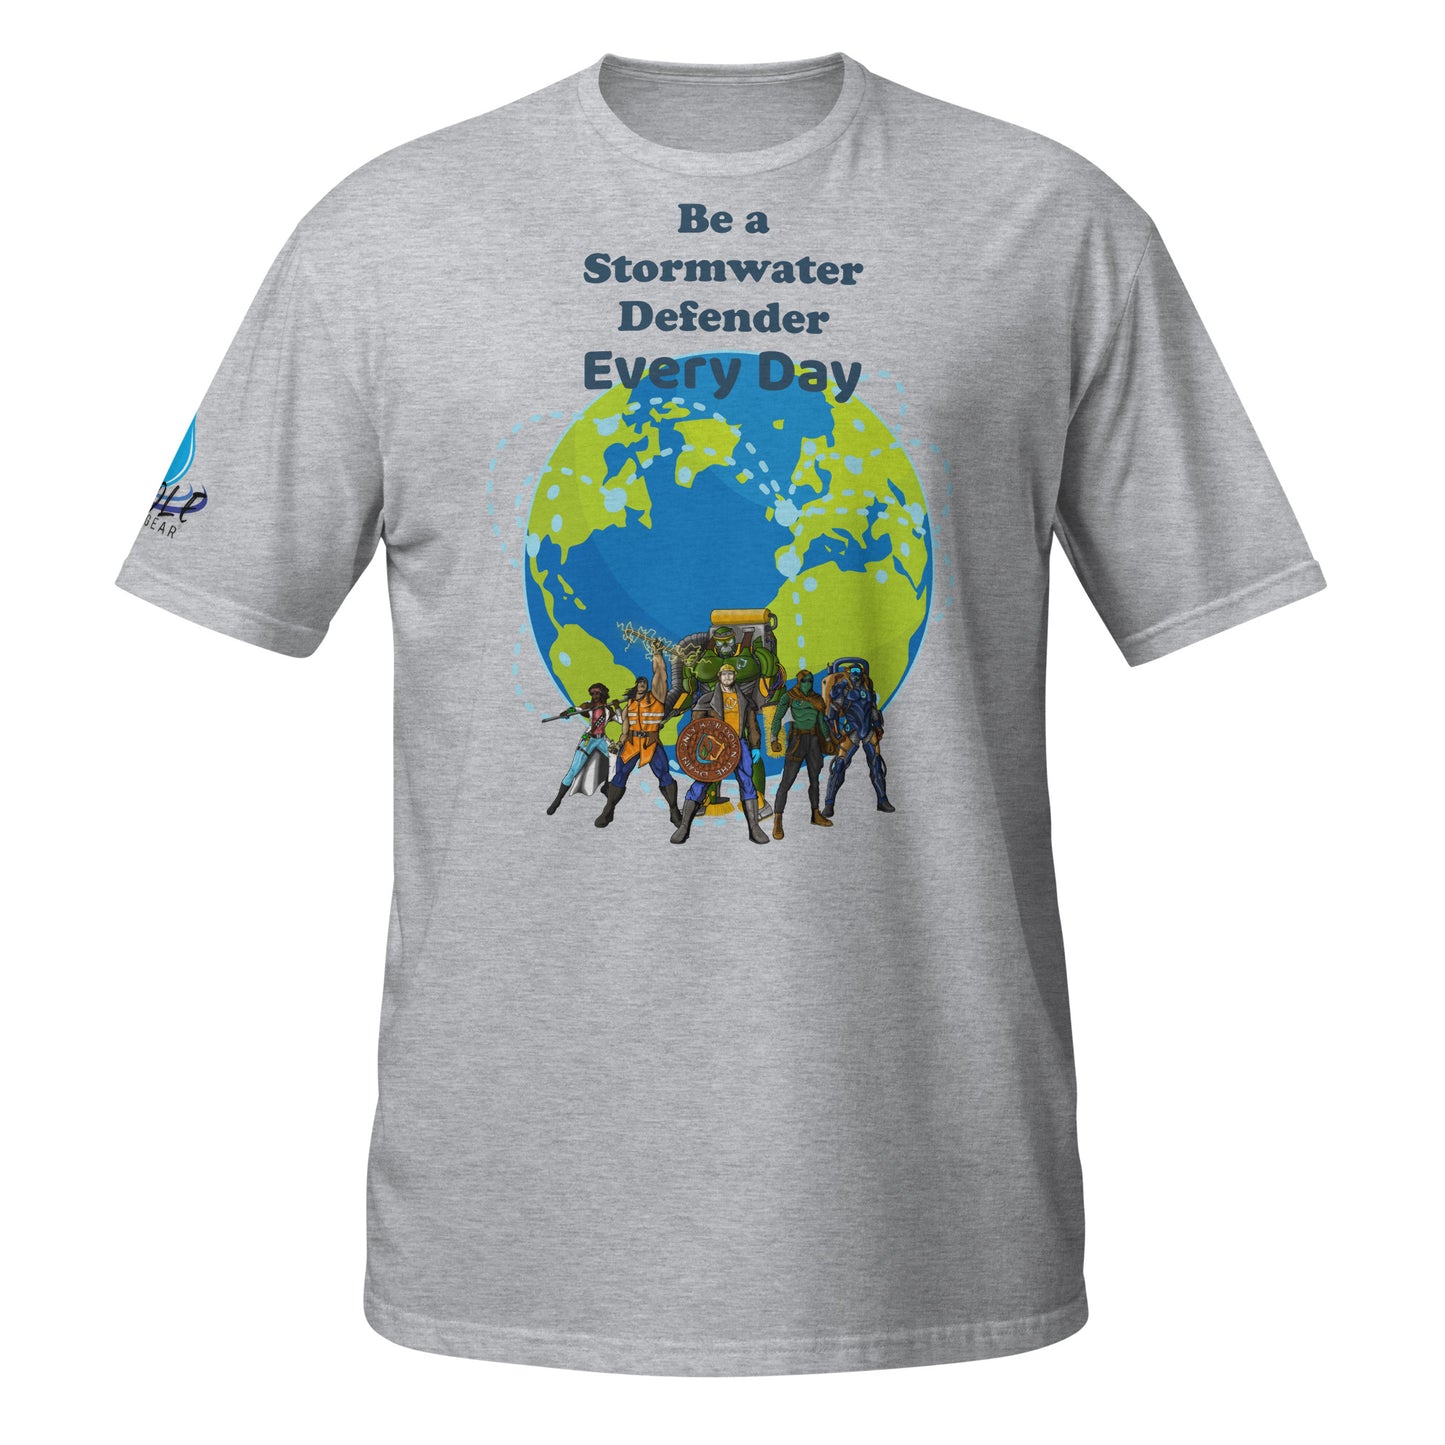 Be a Stormwater Defender Every Day - Short-Sleeve Unisex T-Shirt